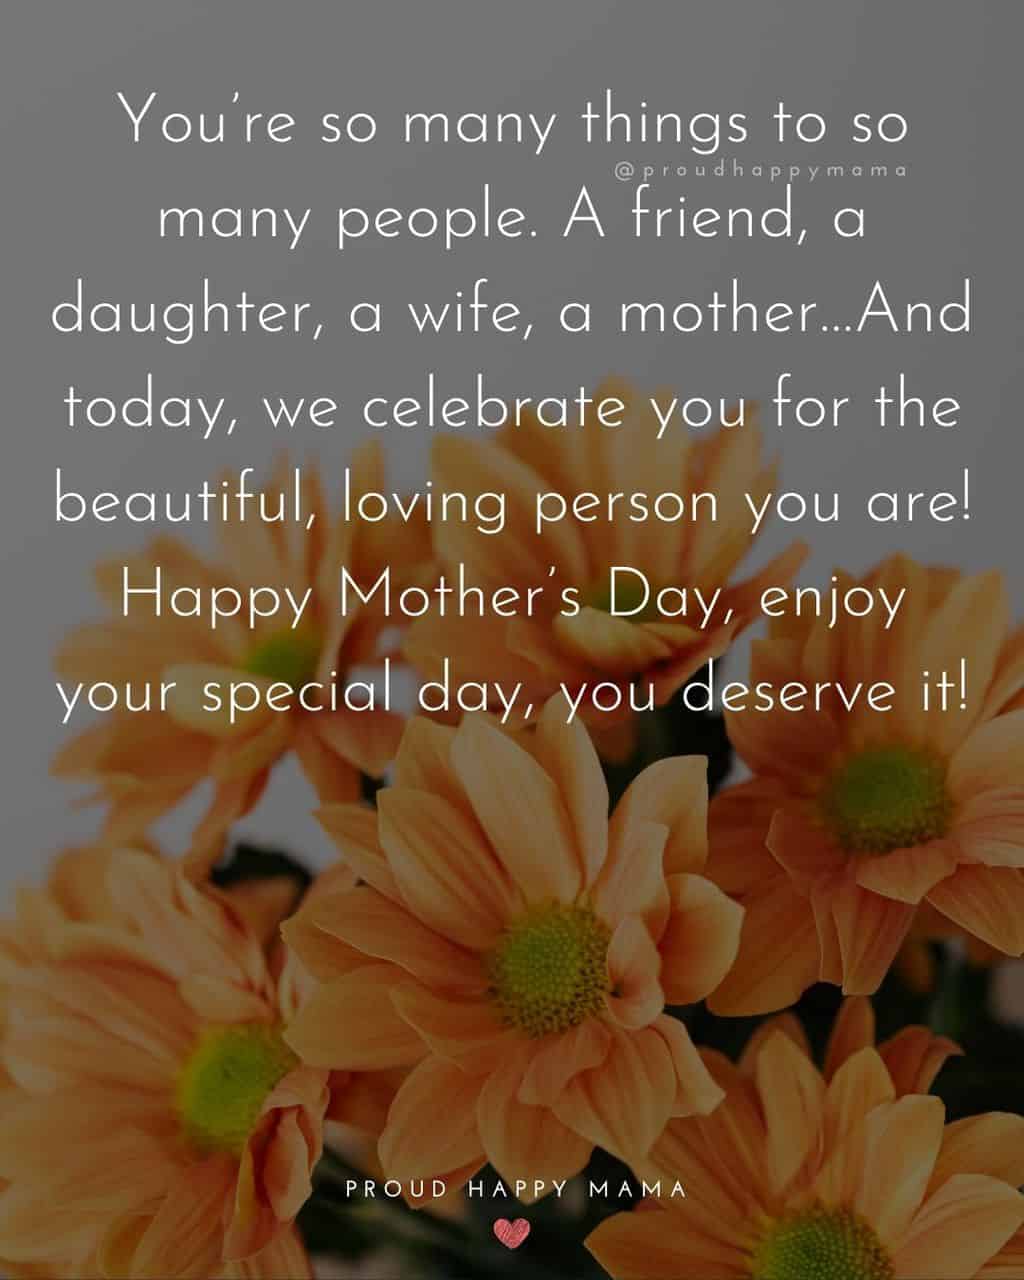 Happy Mothers Day Quotes For Wife - You’re so many things to so many people. A friend, a daughter, a wife, a mother…And